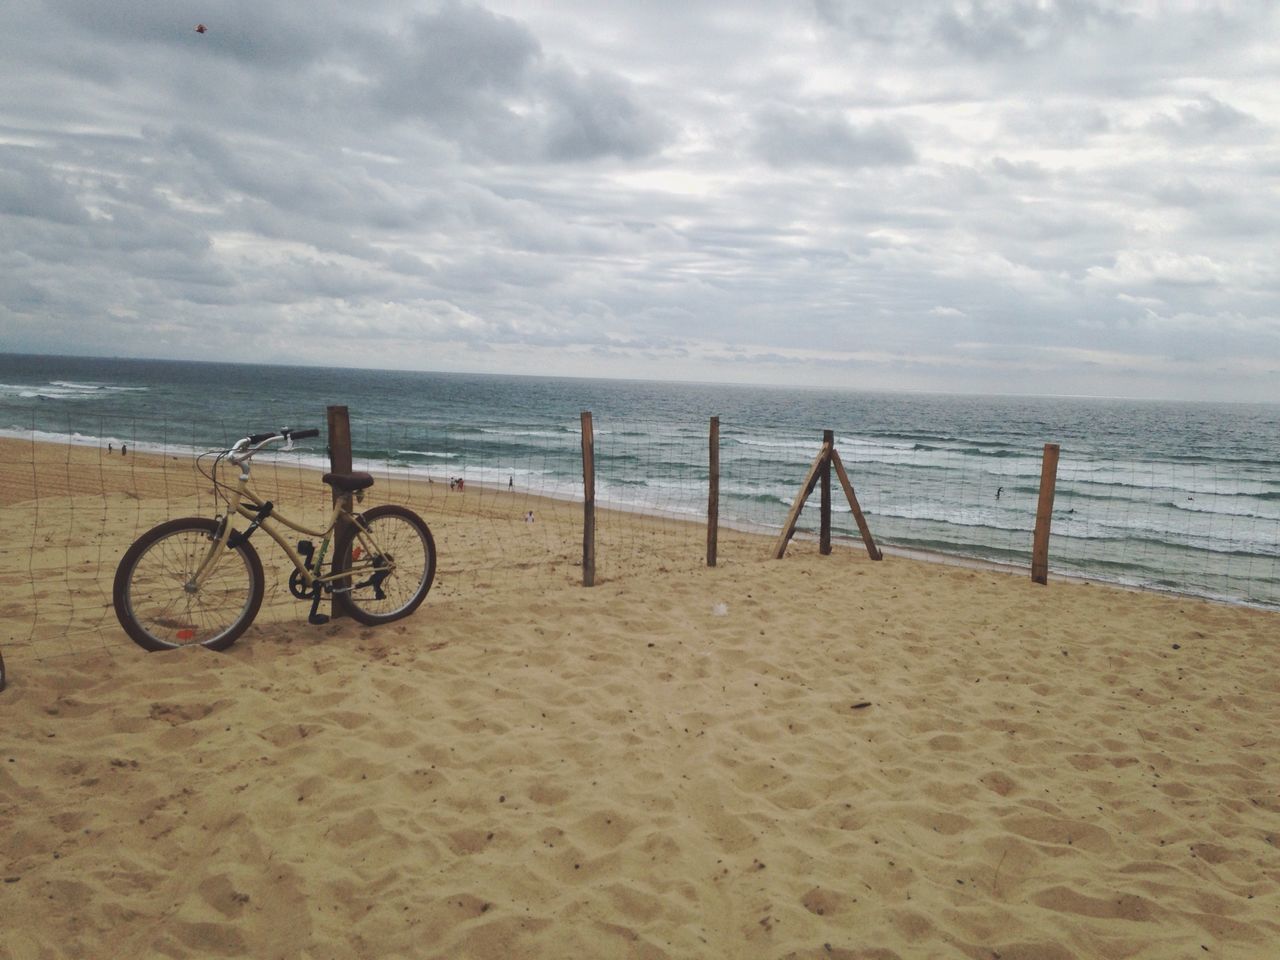 sea, horizon over water, sky, beach, water, cloud - sky, shore, cloudy, tranquility, tranquil scene, scenics, sand, cloud, beauty in nature, nature, bicycle, day, idyllic, pier, outdoors